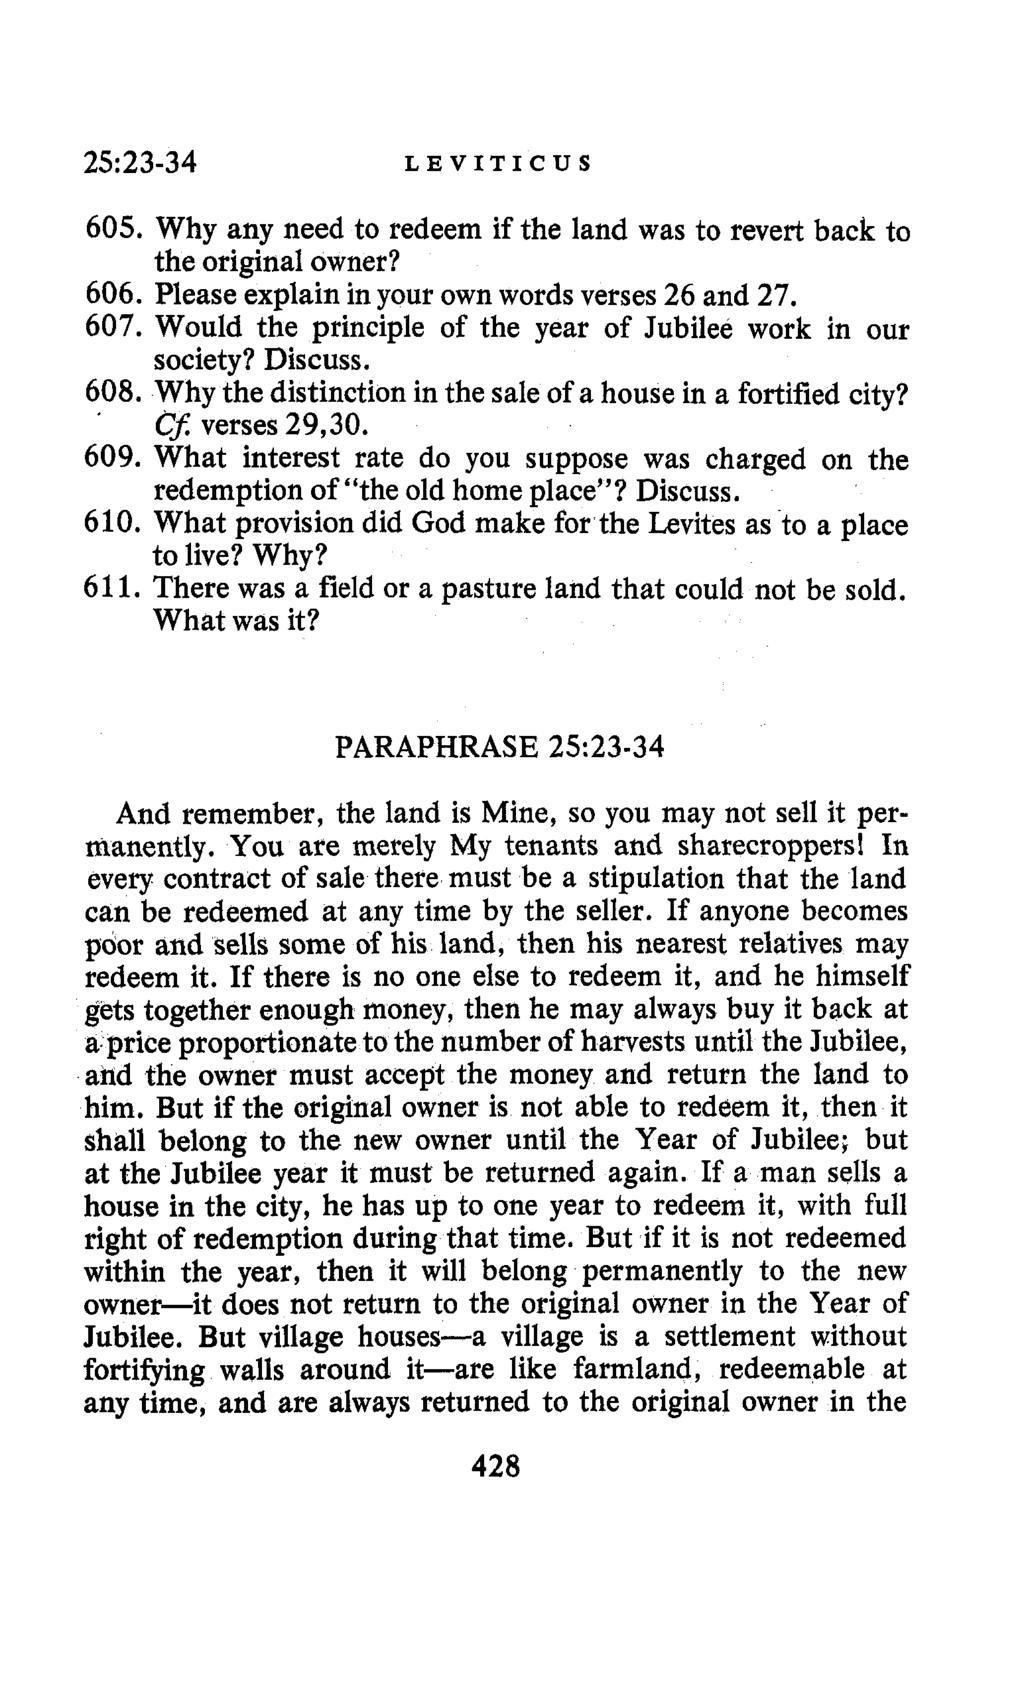 25: 23-34 LEVITICUS 605, Why any need to redeem if the land was to revert back to the original owner? 606. Please explain in your own words verses 26 and 27. 607.